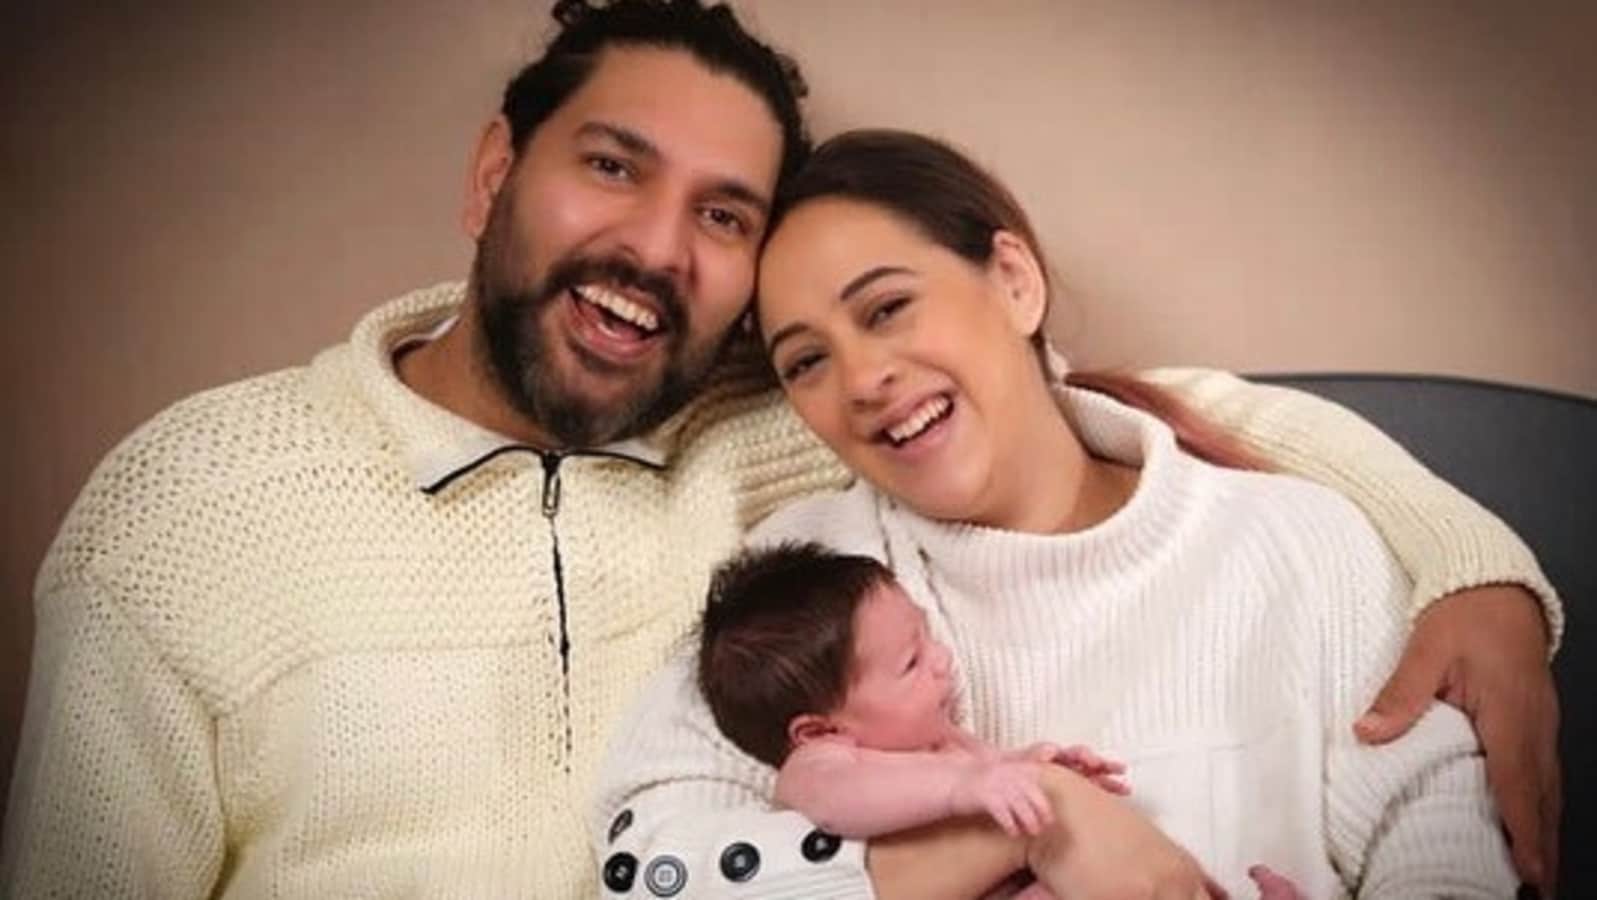 Hazel Keech and Yuvraj Singh share pics of their son Orion Keech Singh on Father's Day. Here's what his name means